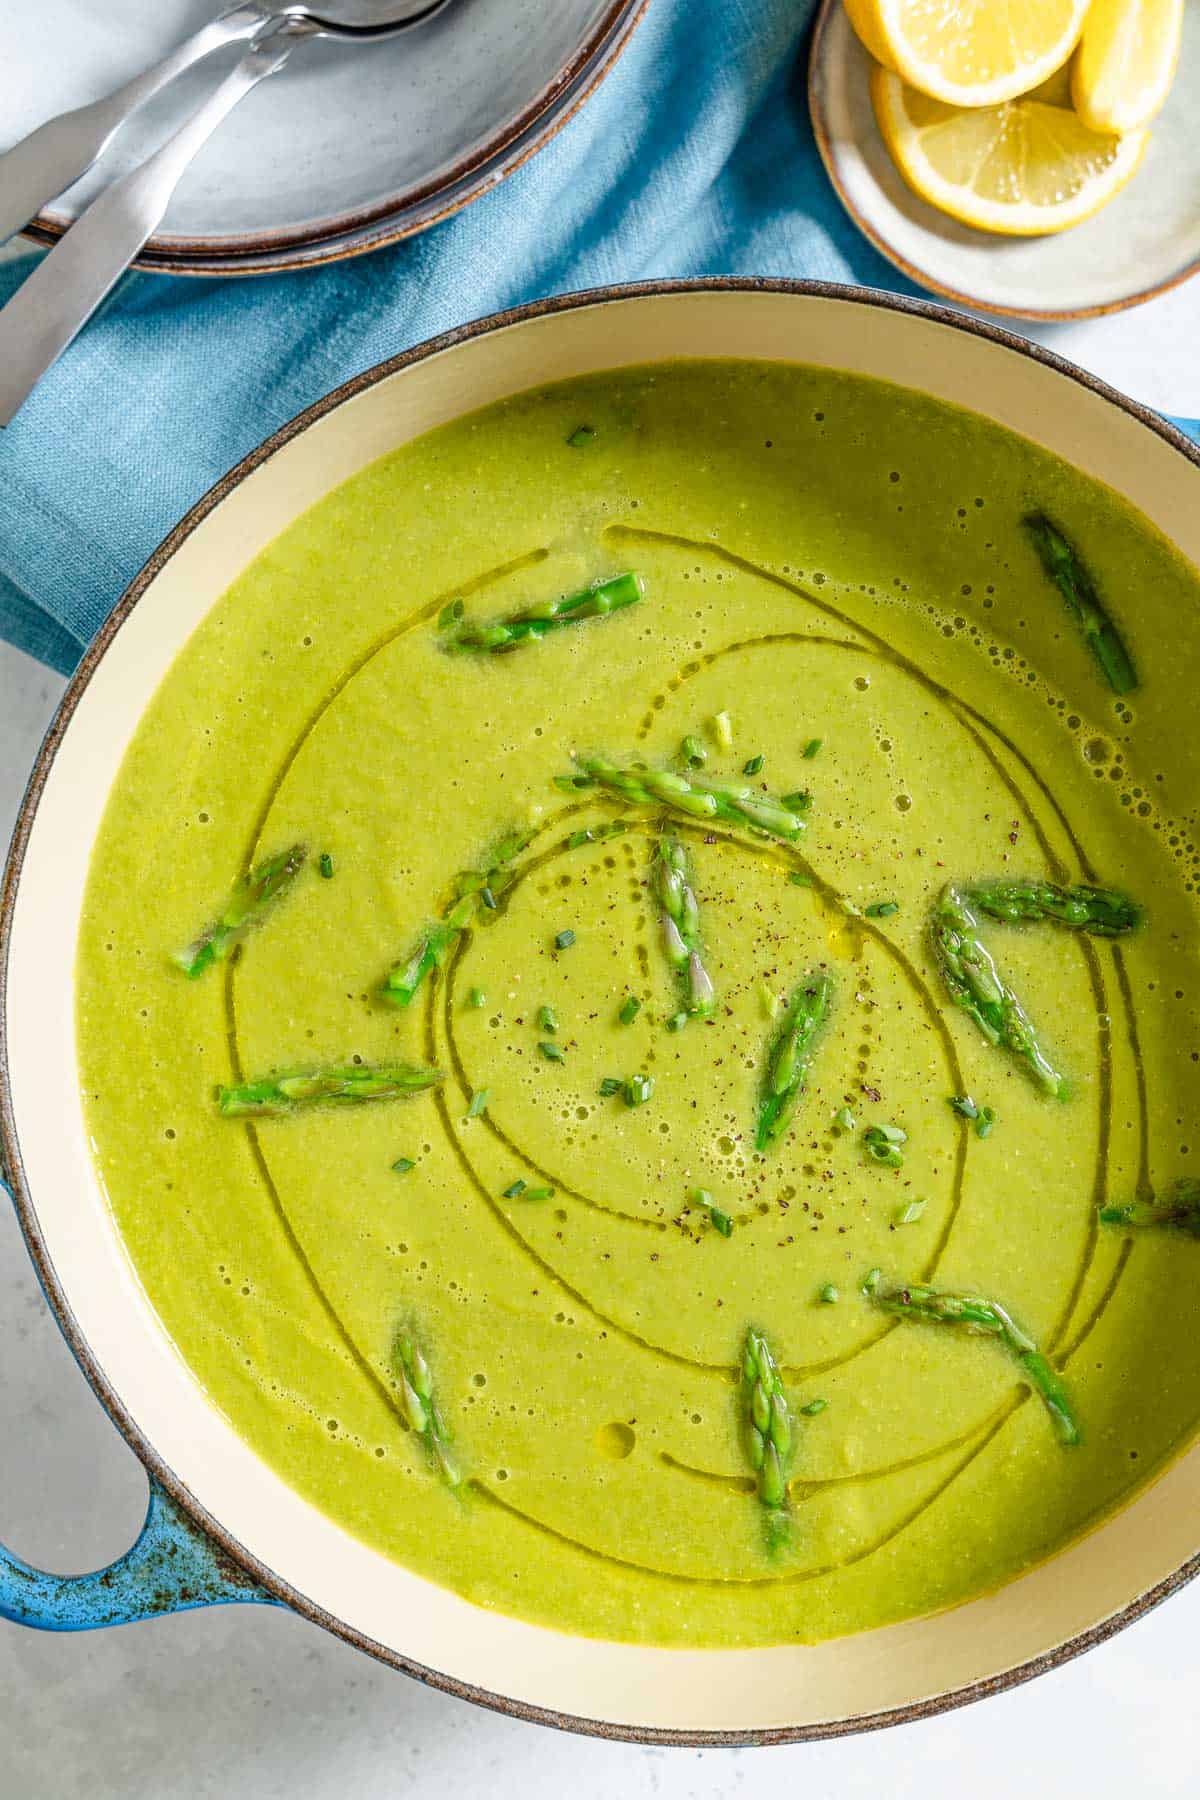 An overhead photo of a pot of asparagus soup. Next to this is a small plate with lemon wedges, and a stack of 2 plates with 2 spoons on top.